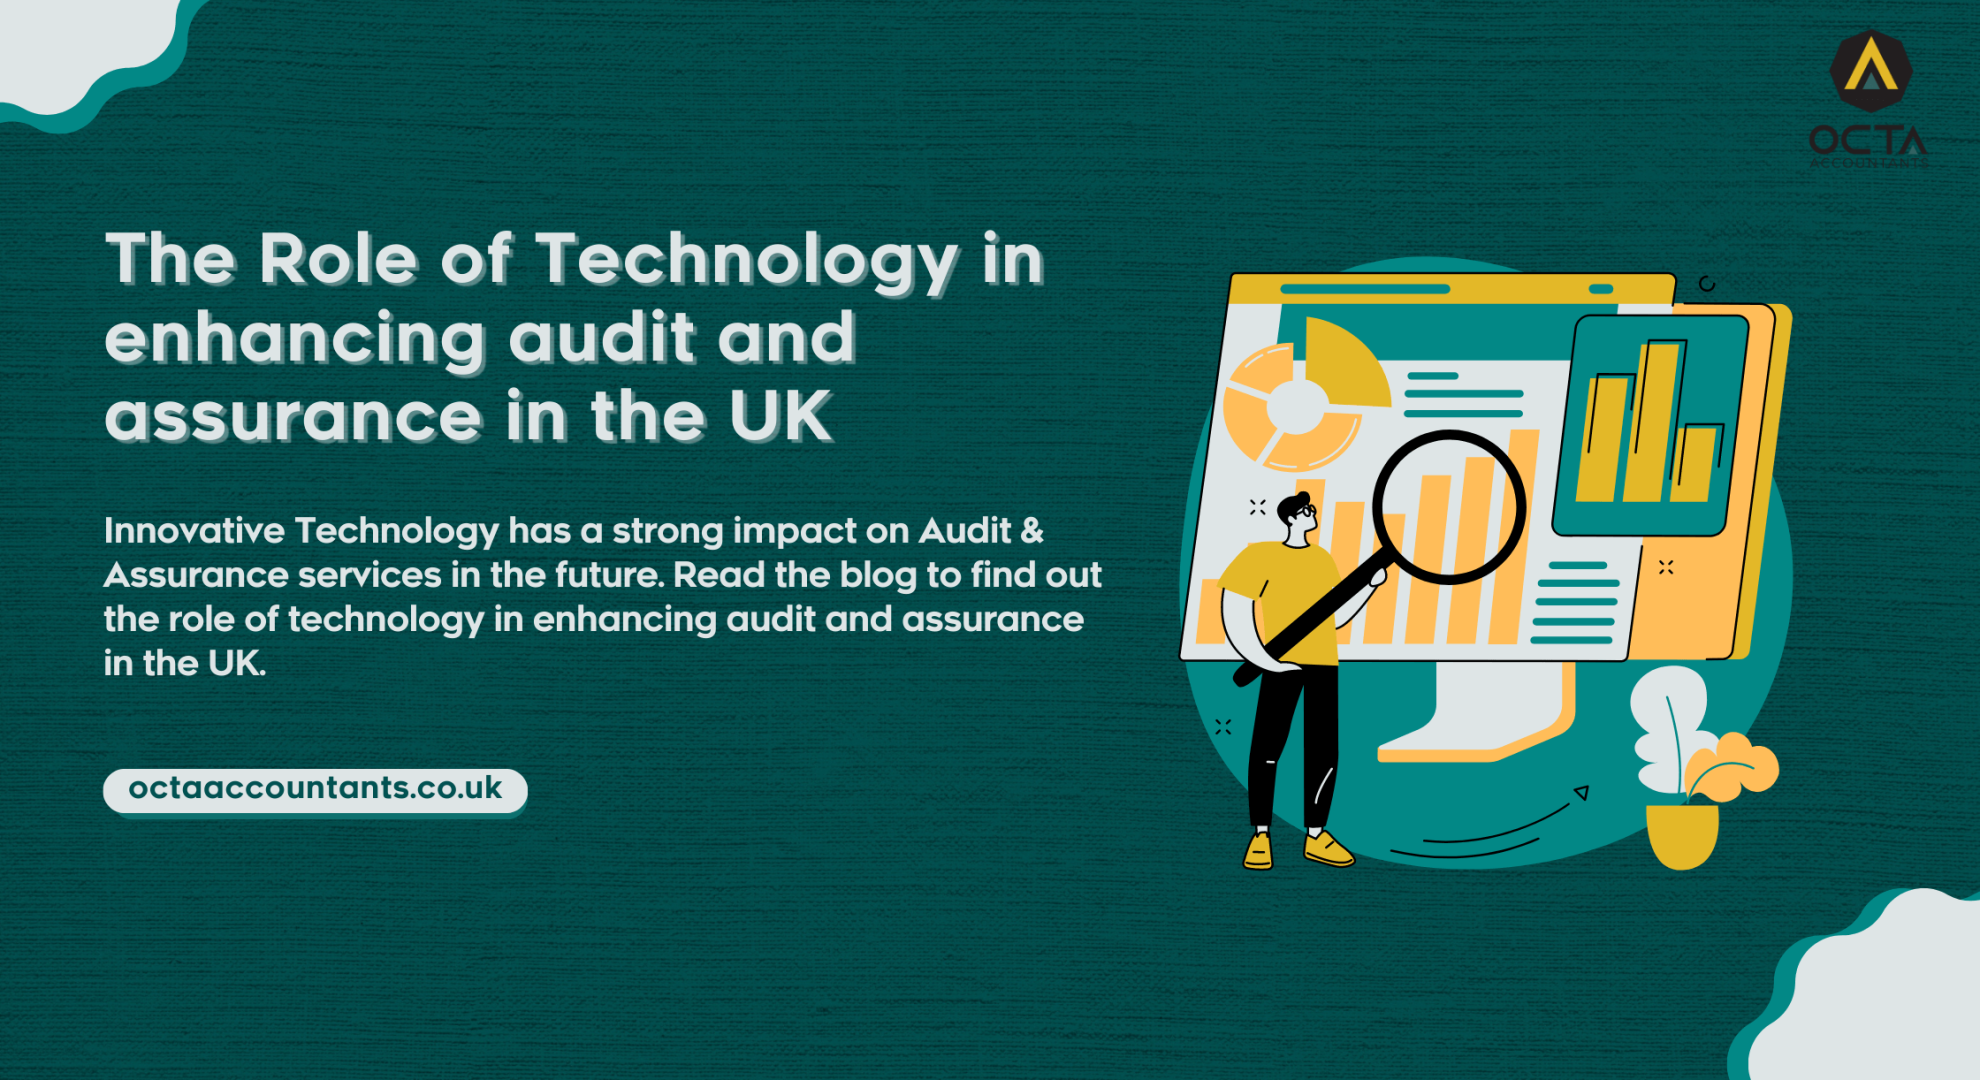 The Role of Technology in enhancing audit and assurance in the UK